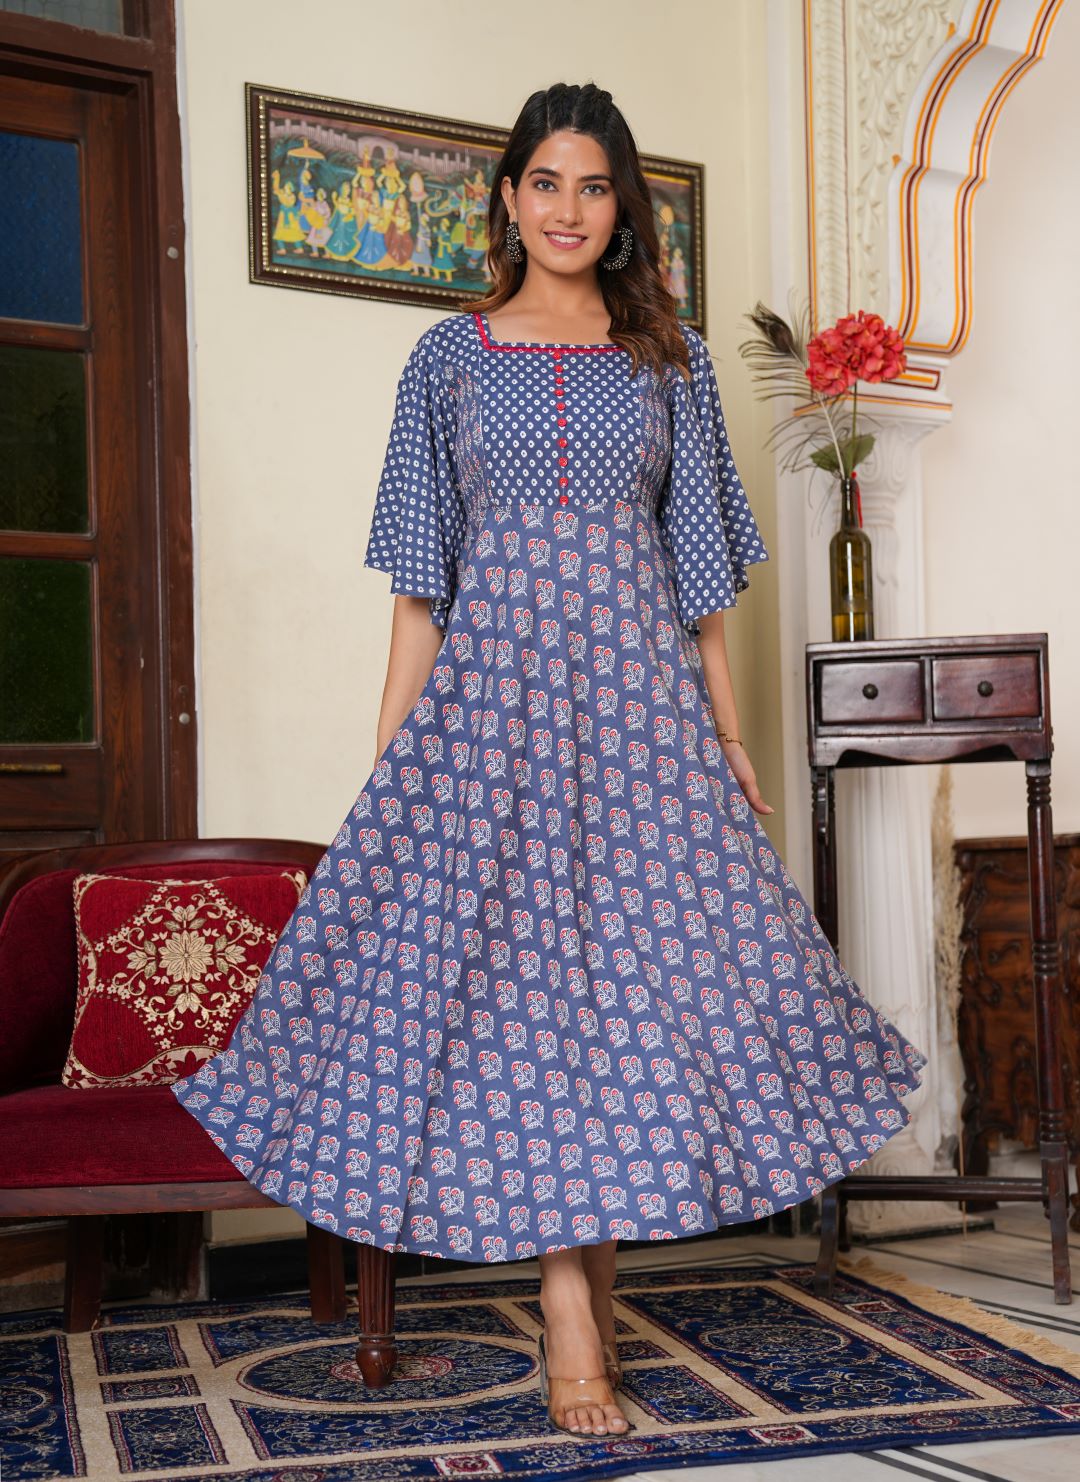 Buy 56/4XL Size Ankle Length 20 to 40% Discount on Indian Kurti Tunic  Online for Women in USA